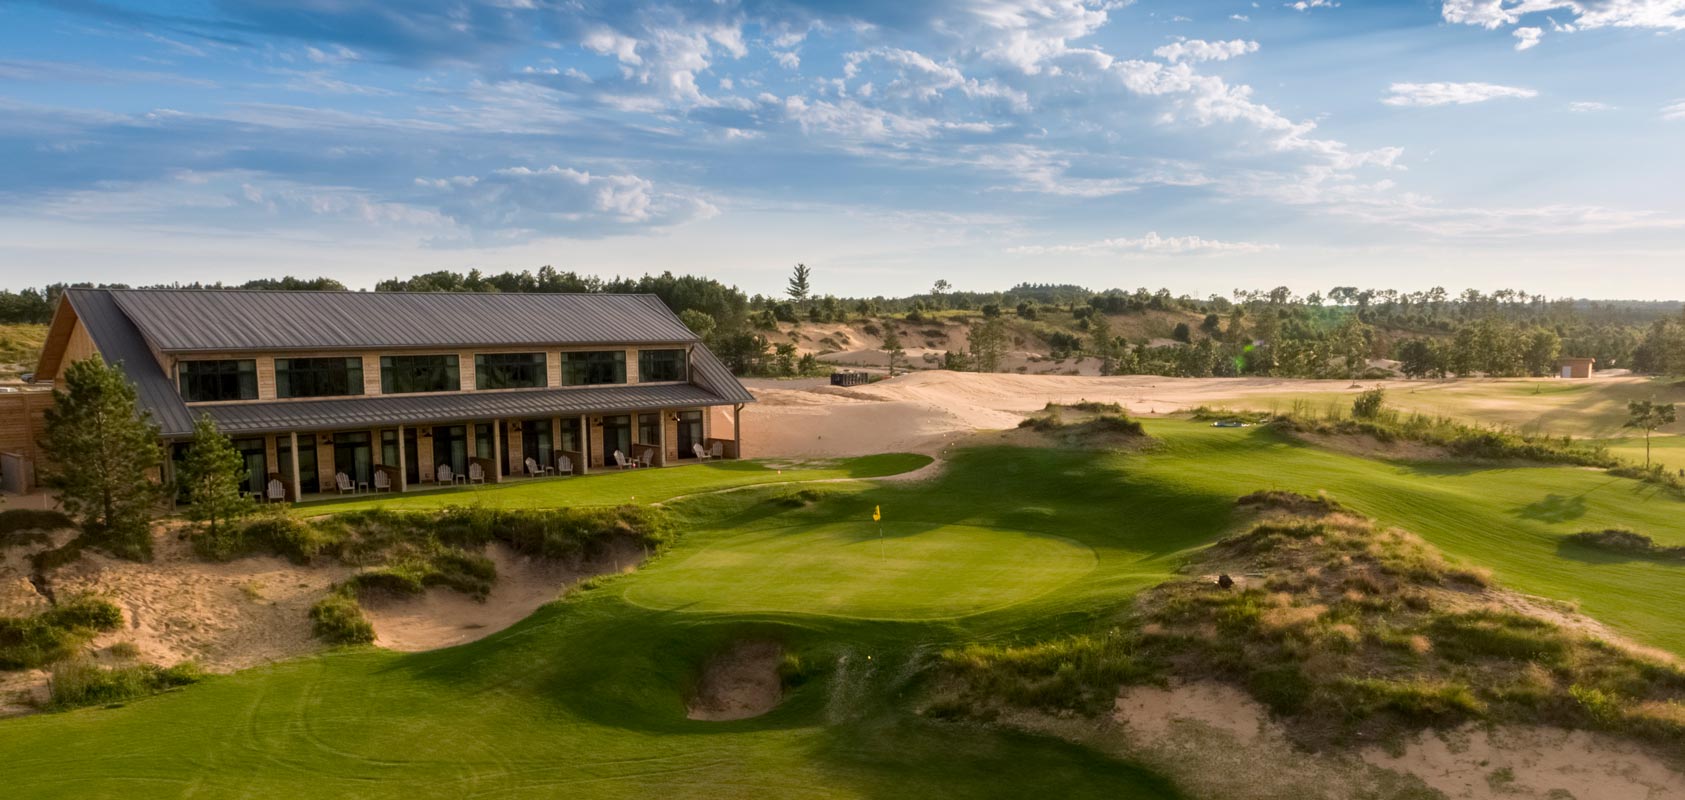 Empowering local decisions and golfer safety at Sand Valley Golf Resort